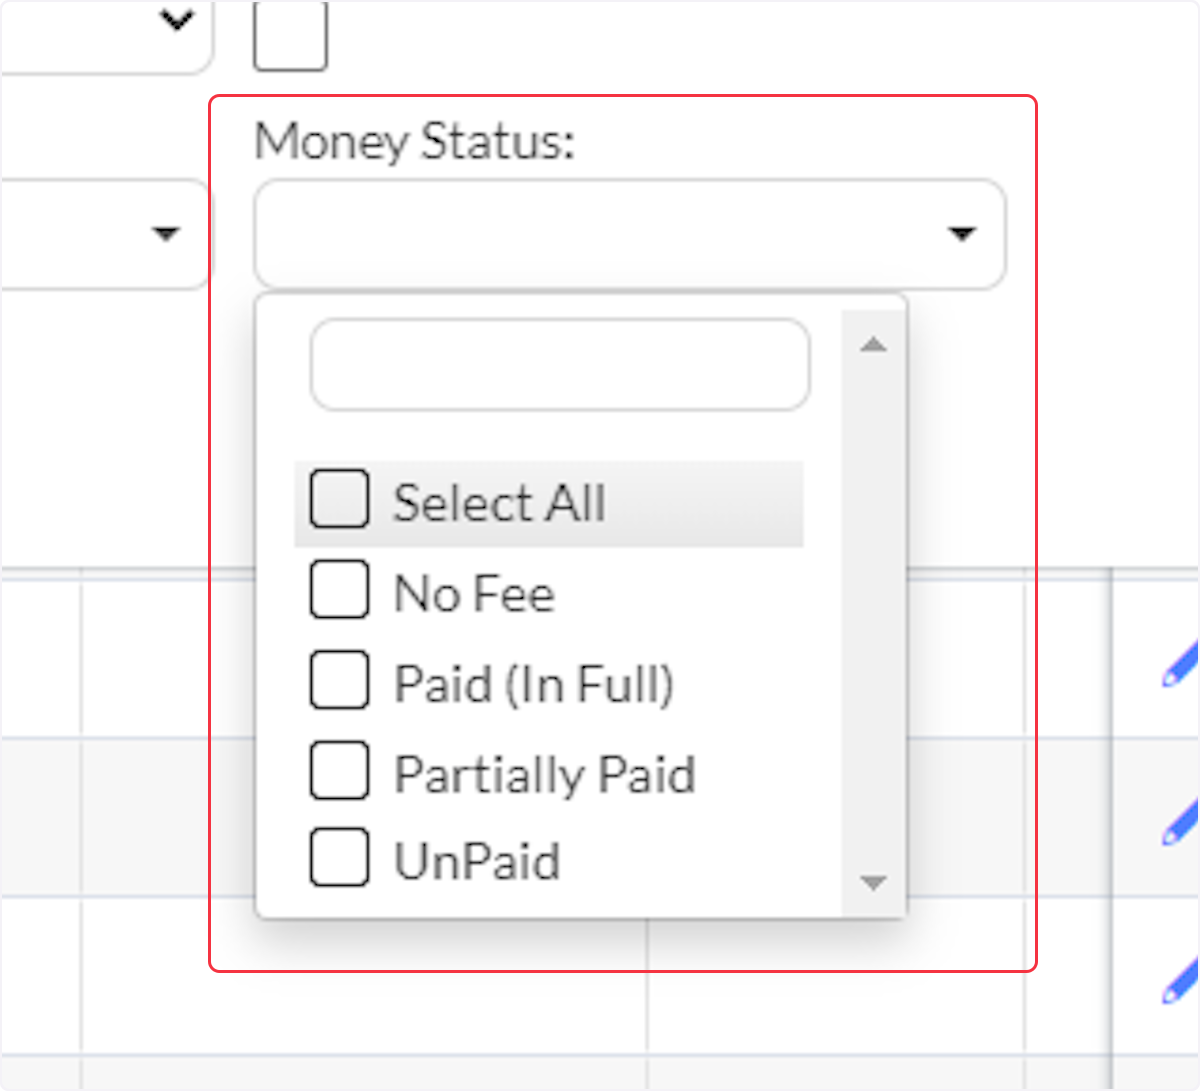 In the Money Status Field, there are 4 options, choose which ones to apply.